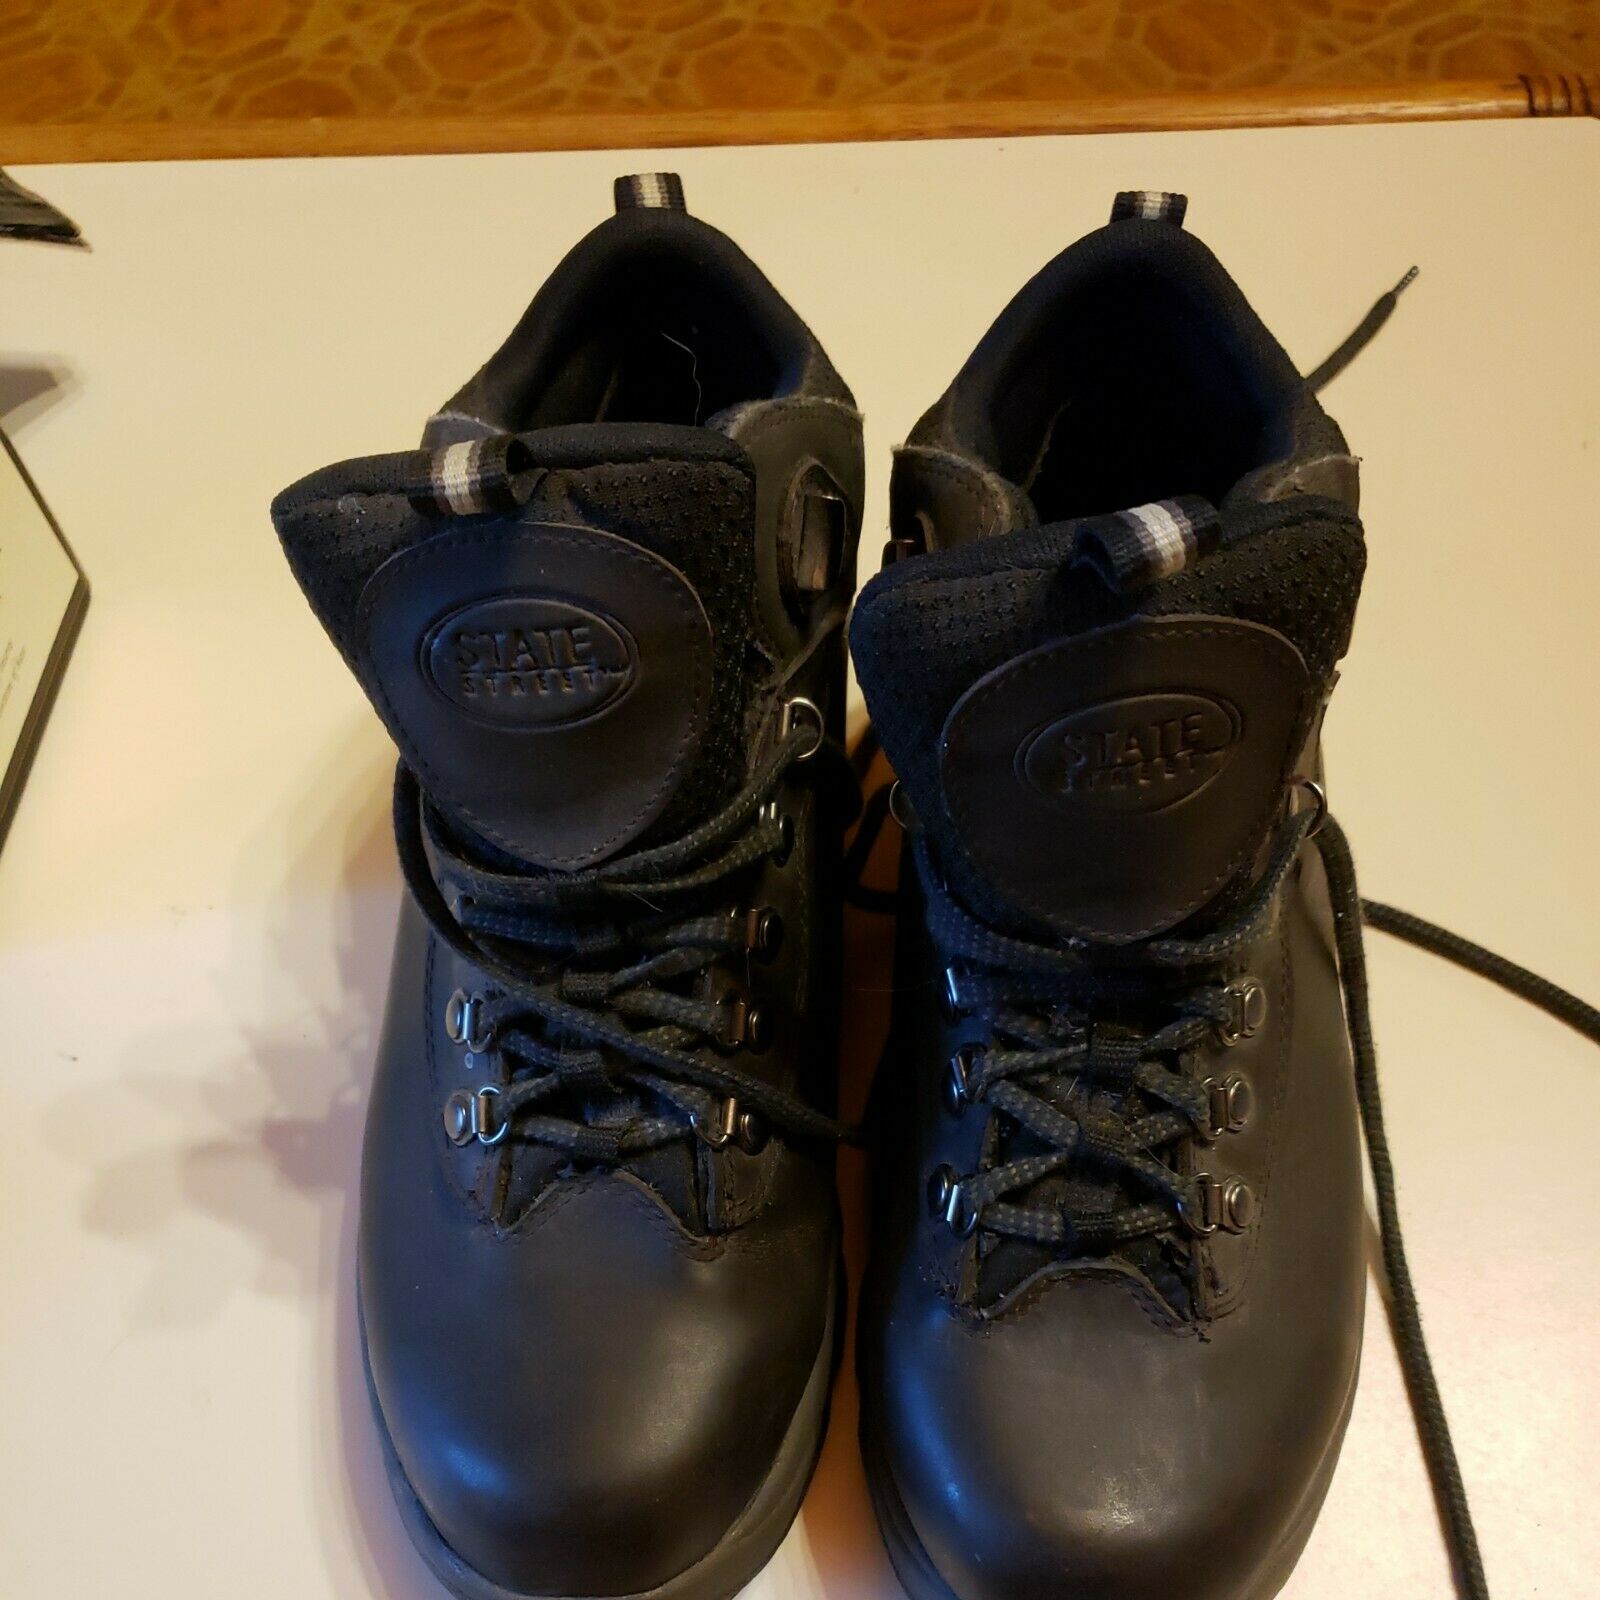 State Street Hiking Boots Men's Size 8 1/2 Black Lace-Up Great Condition